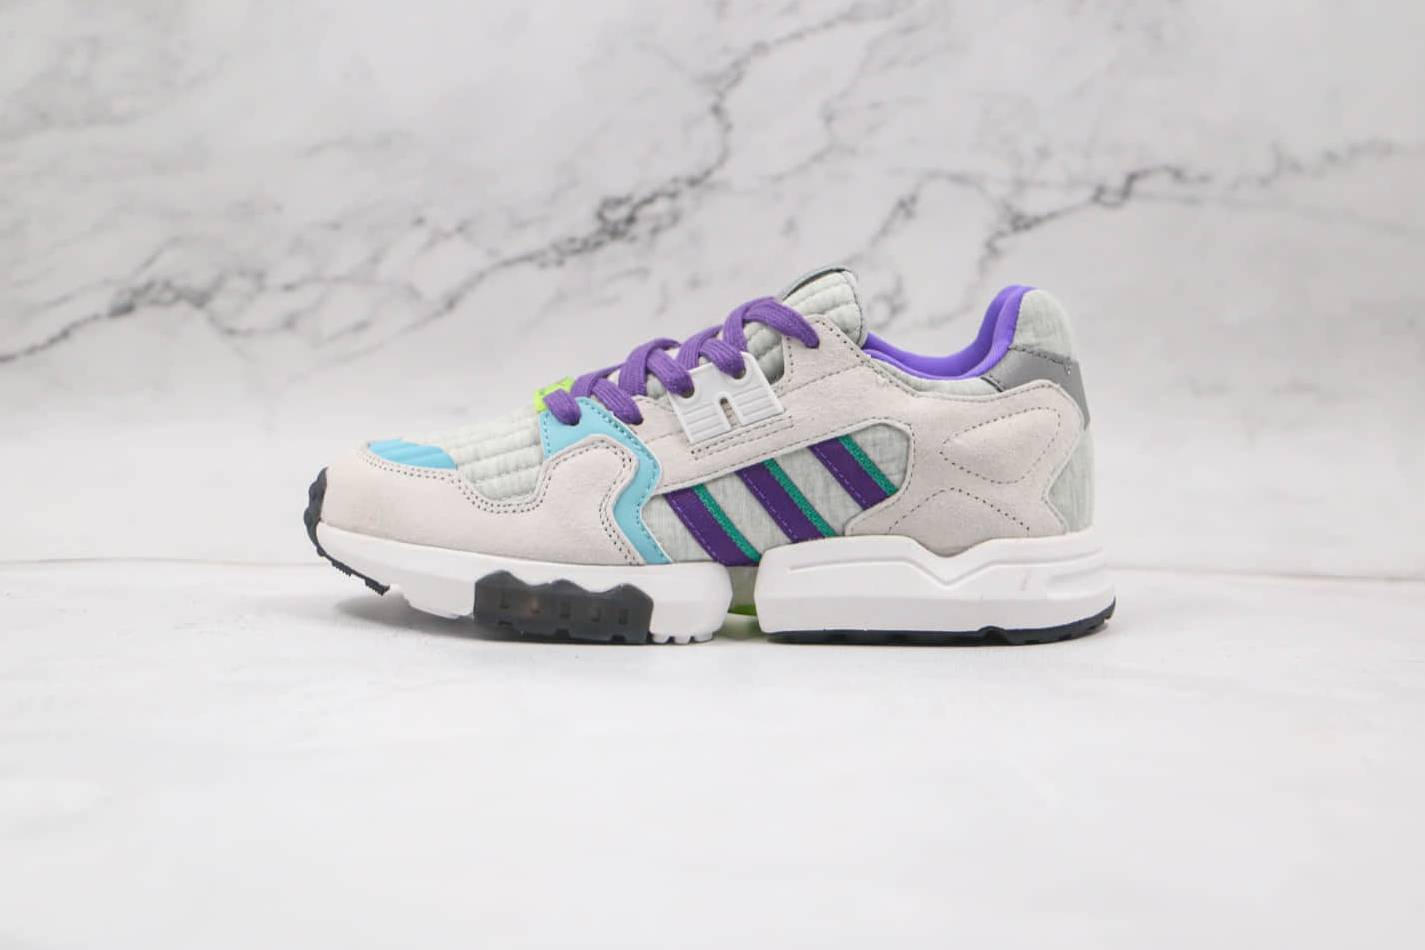 Adidas ZX Torsion Light Bone Brigade Blue Purple EF4388 - Stylish and Colorful Sneakers